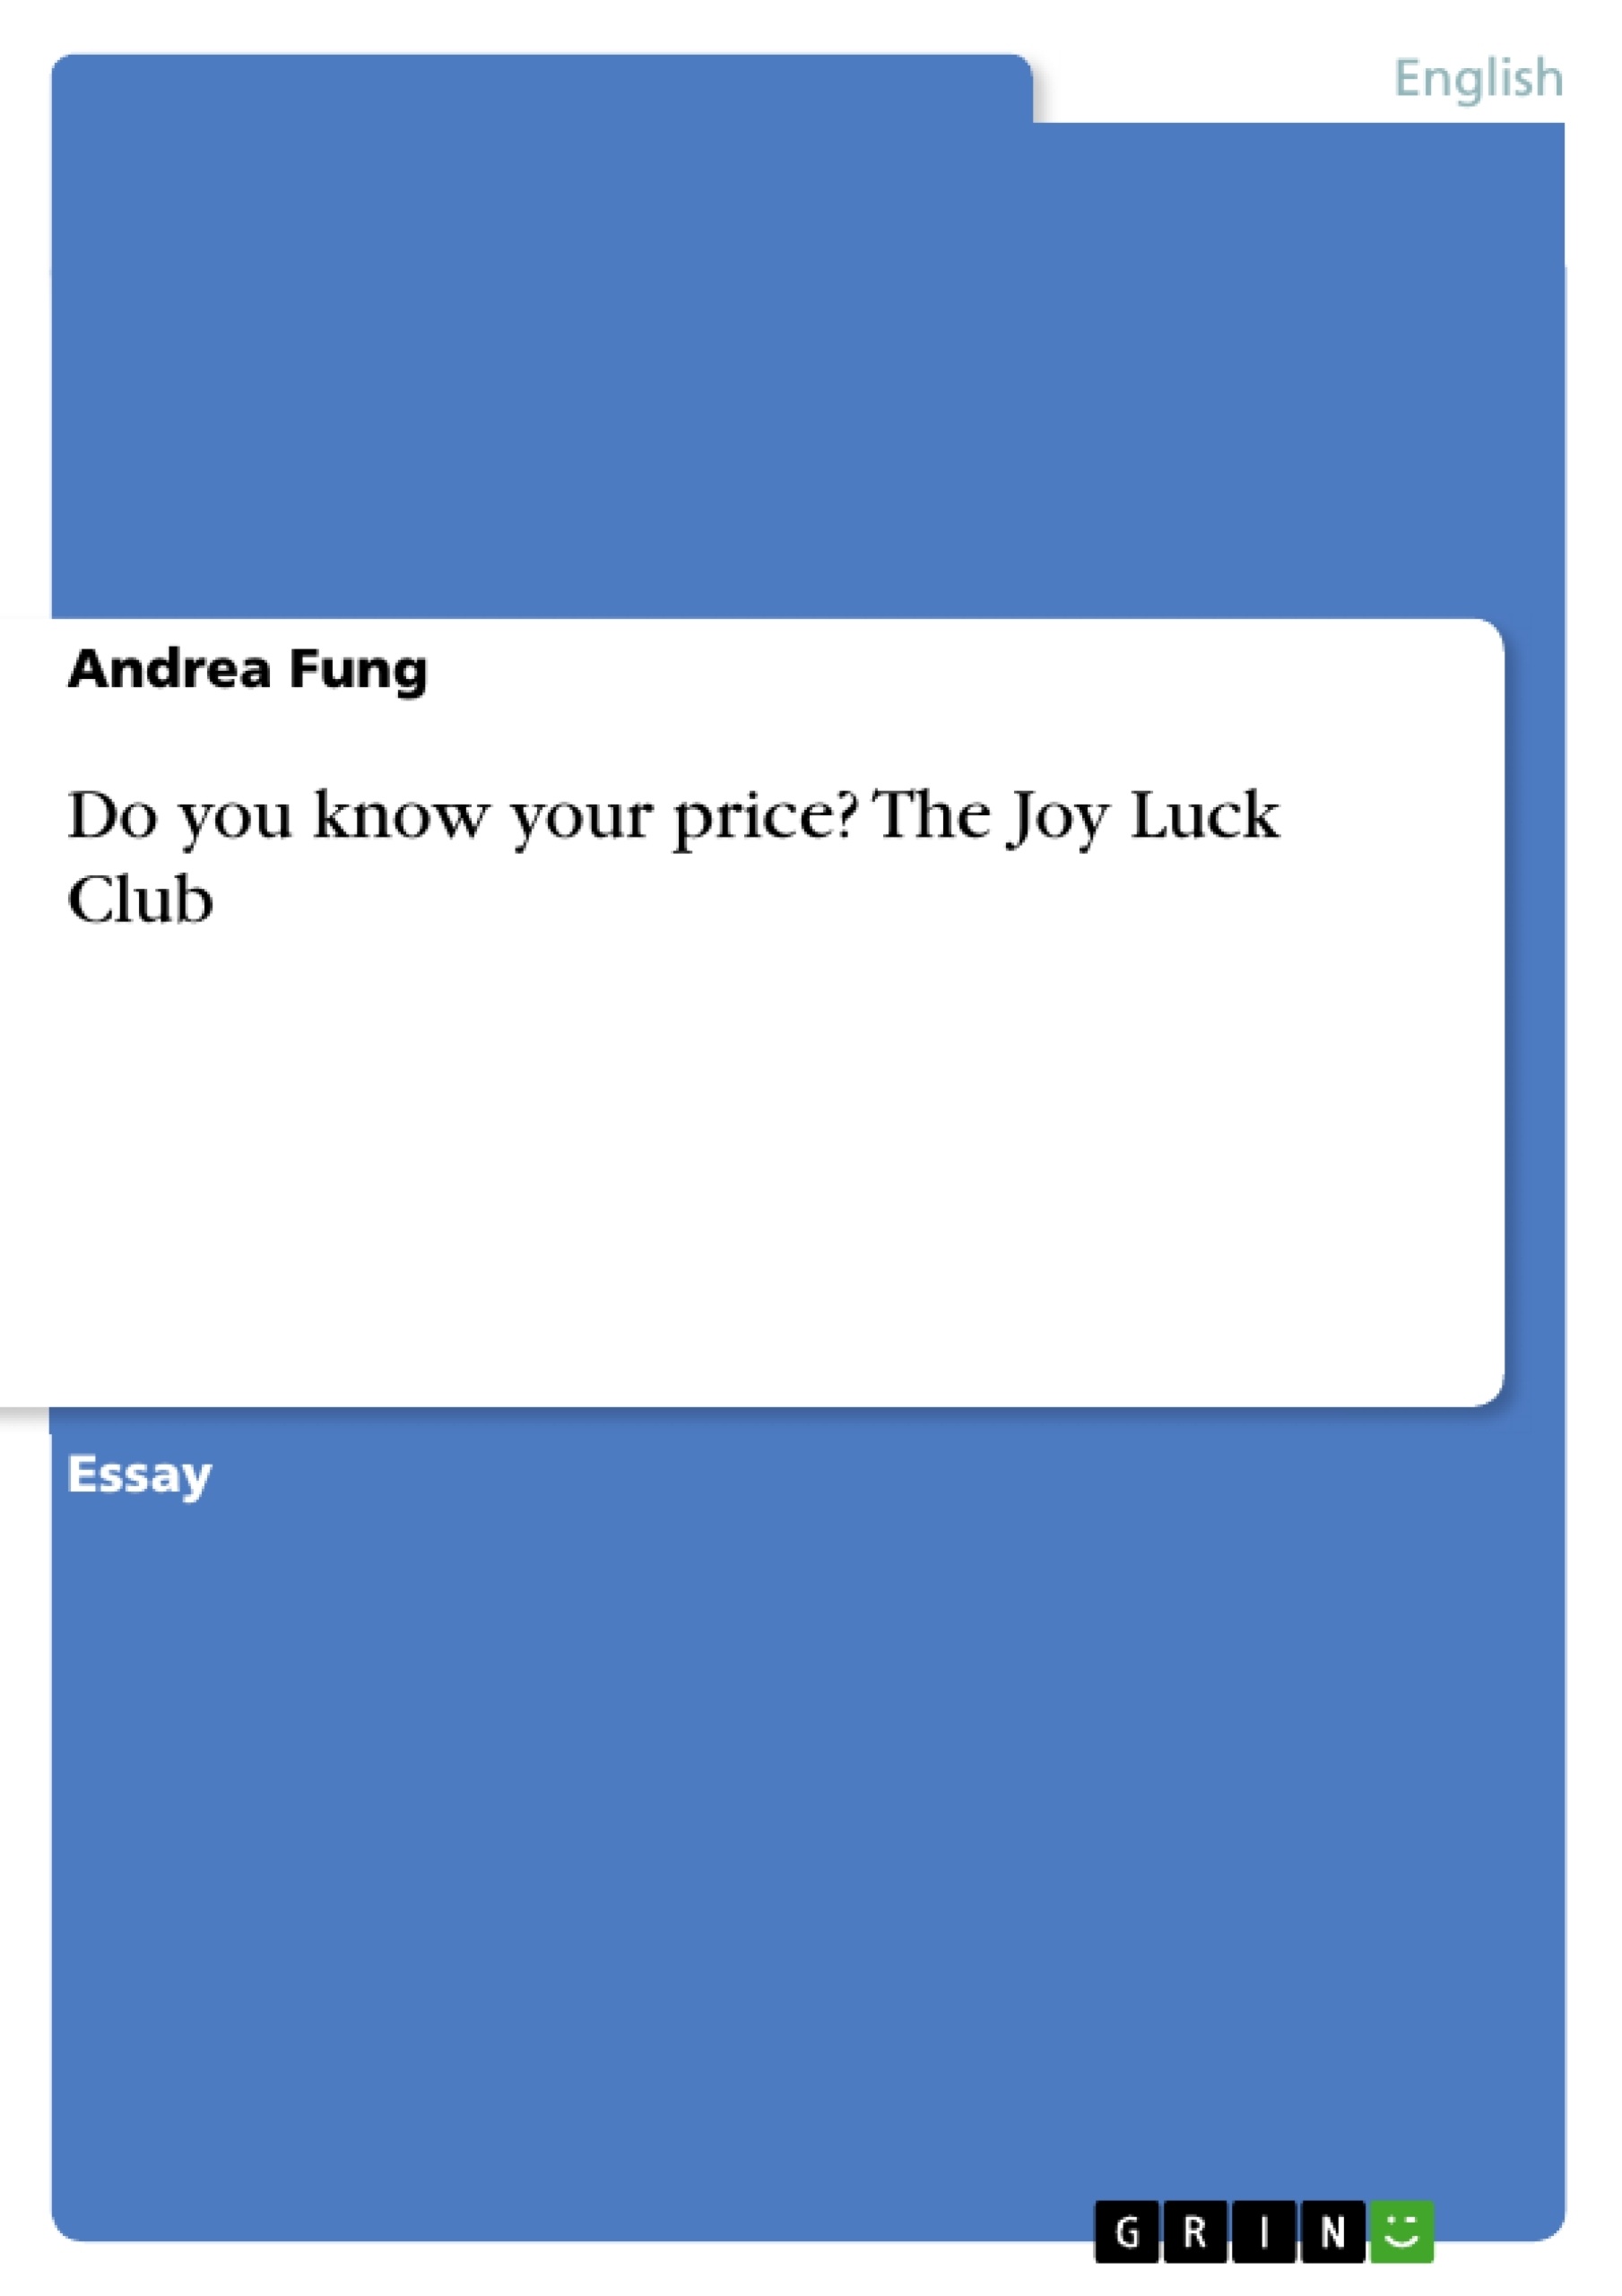 Title: Do you know your price? The Joy Luck Club